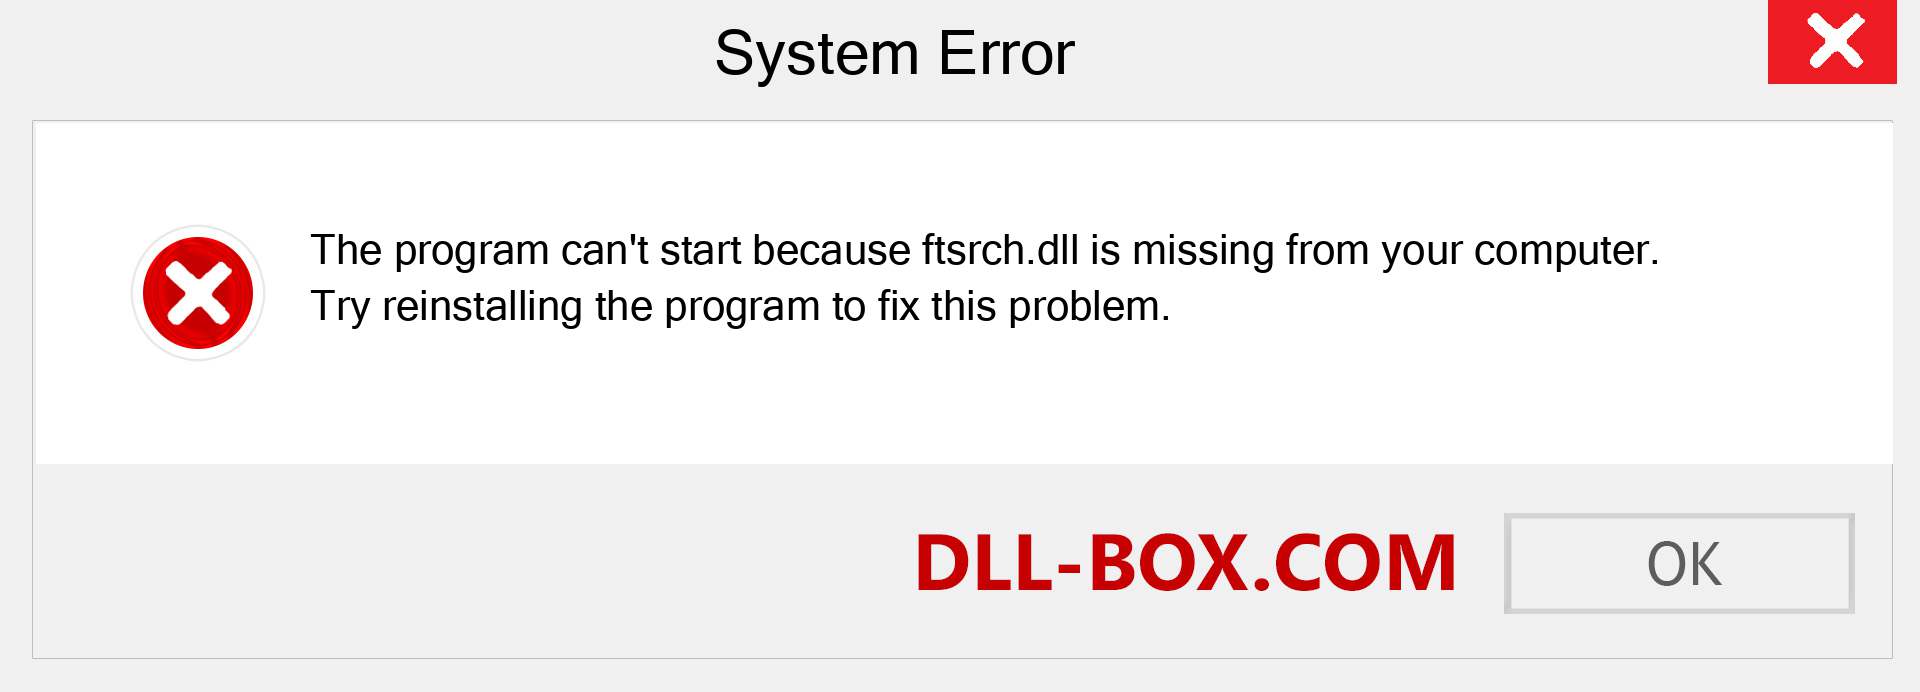  ftsrch.dll file is missing?. Download for Windows 7, 8, 10 - Fix  ftsrch dll Missing Error on Windows, photos, images